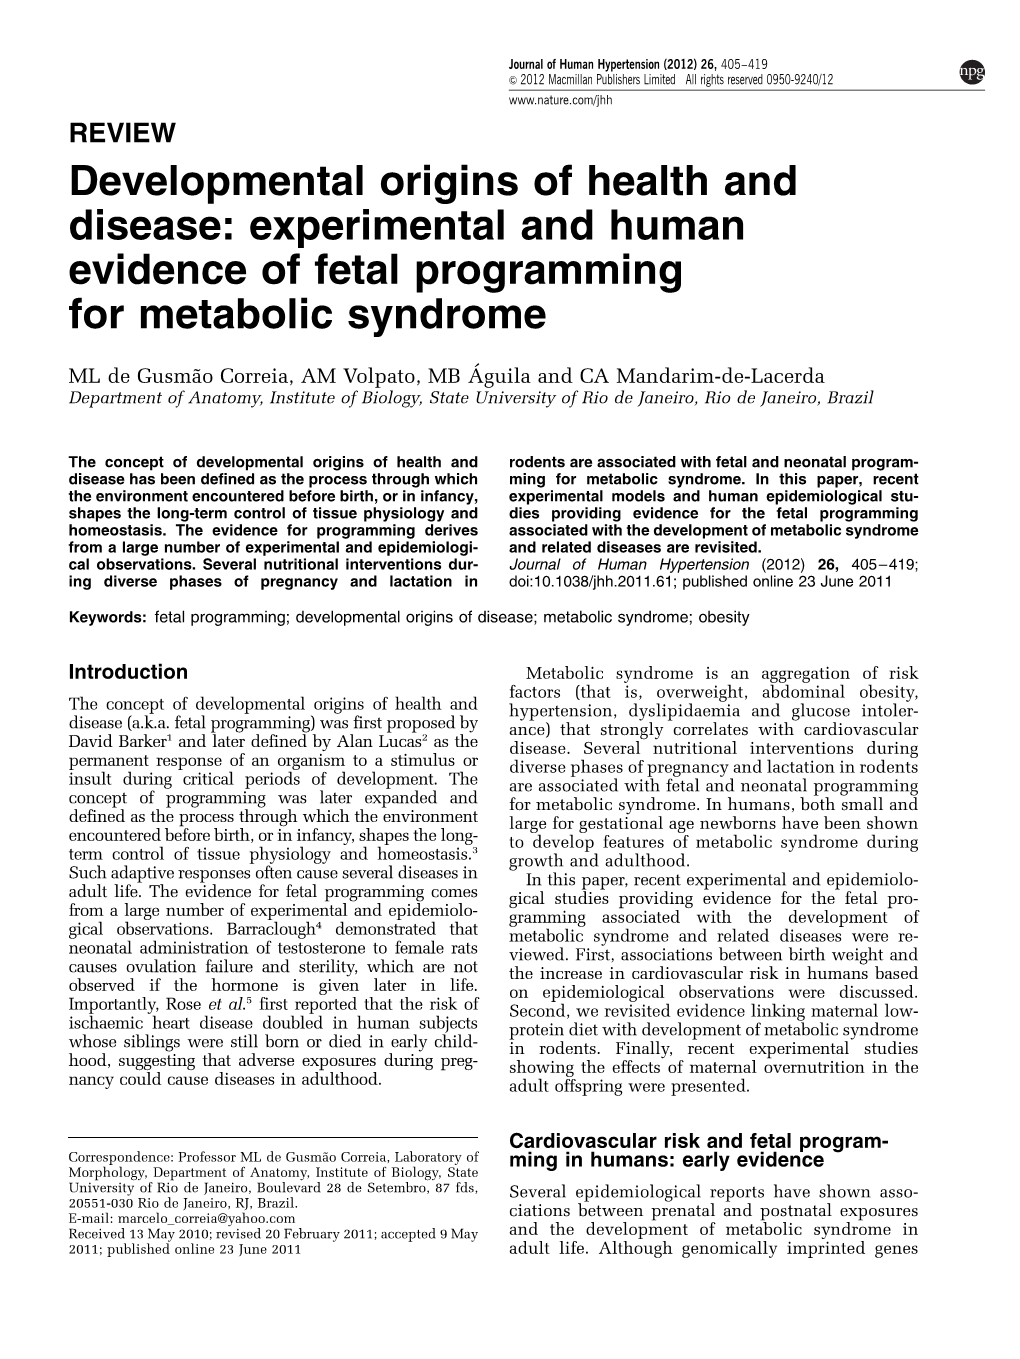 Experimental and Human Evidence of Fetal Programming for Metabolic Syndrome